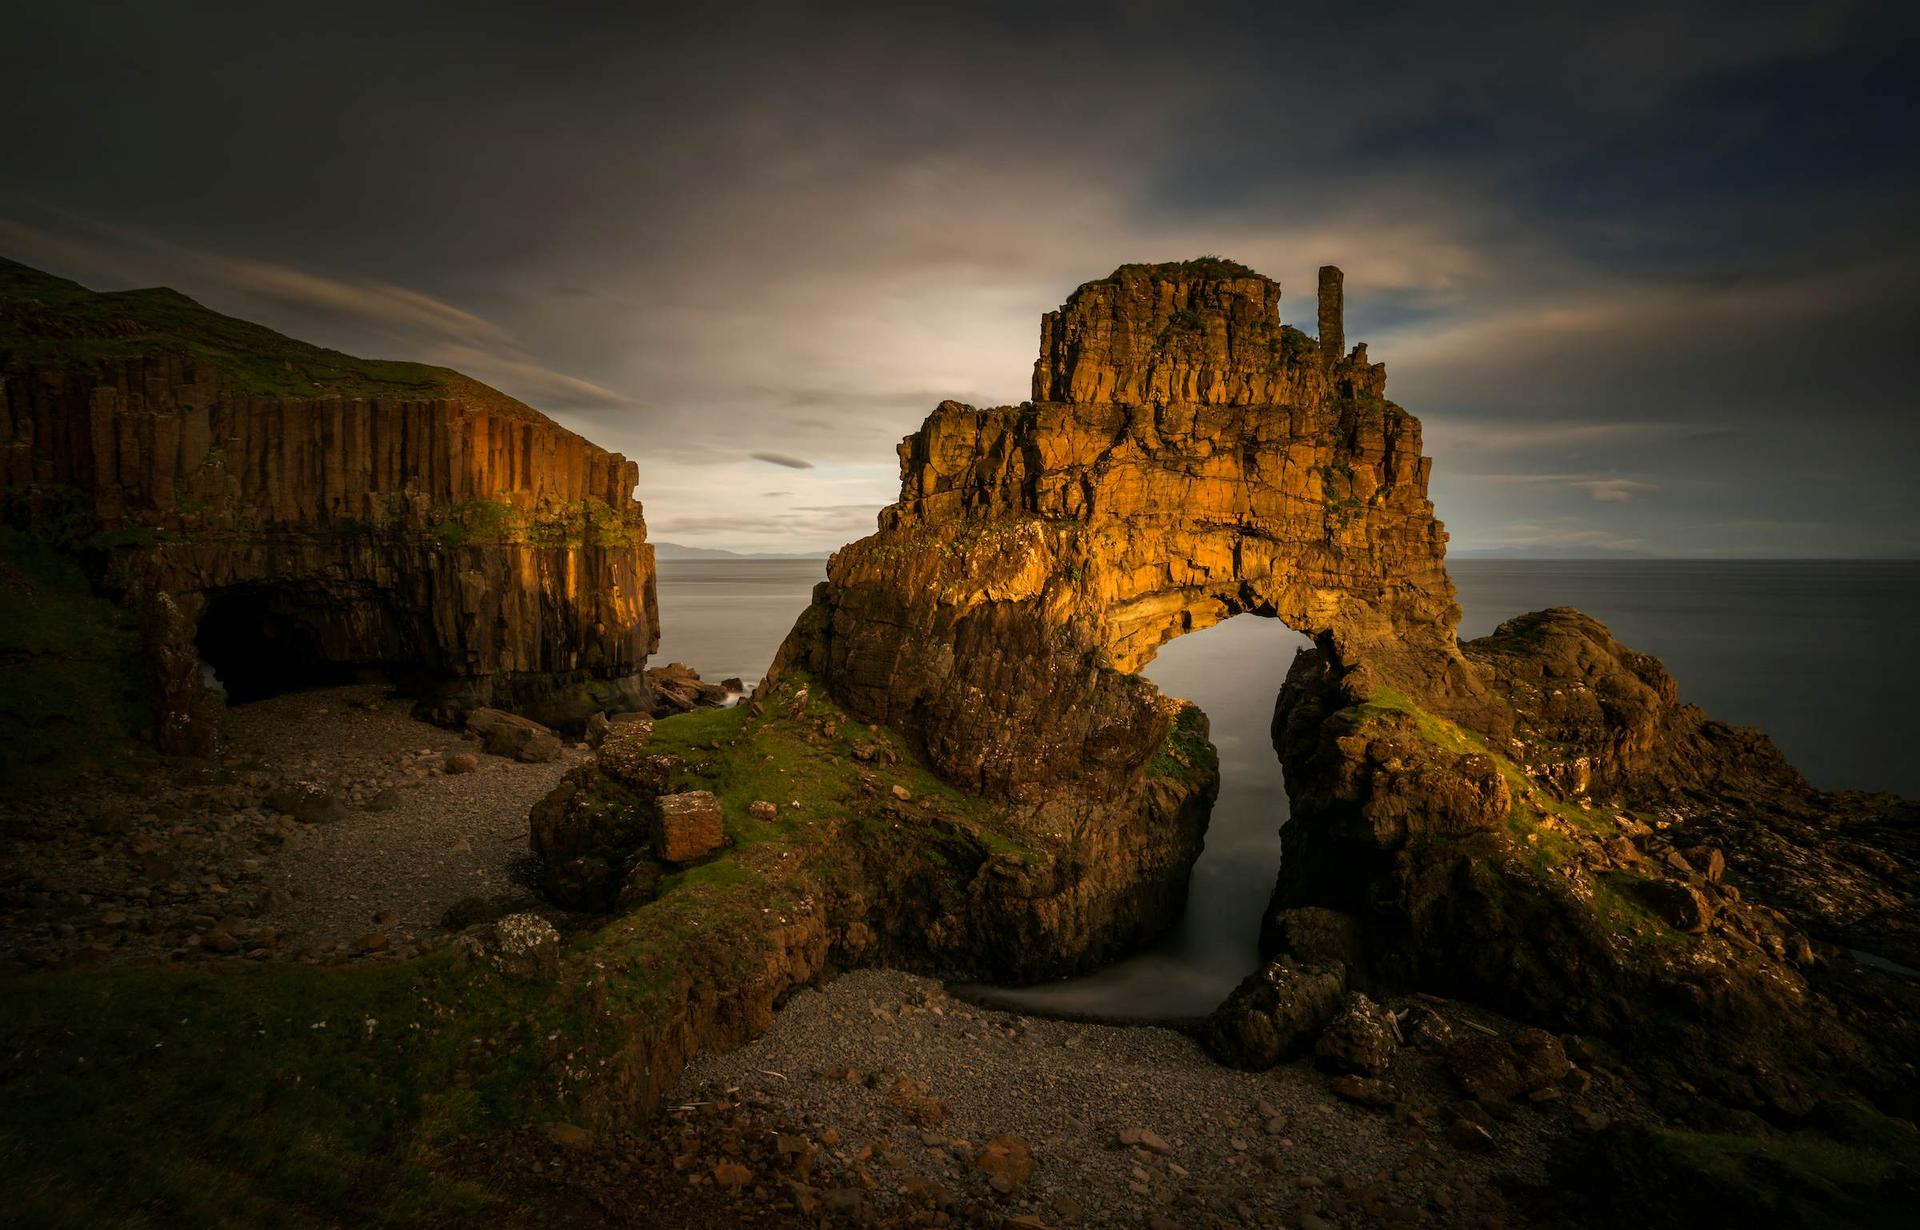 The rock formations of Carsaig Arches at sunset, Isle of Mull, Scotland, United Kingdom